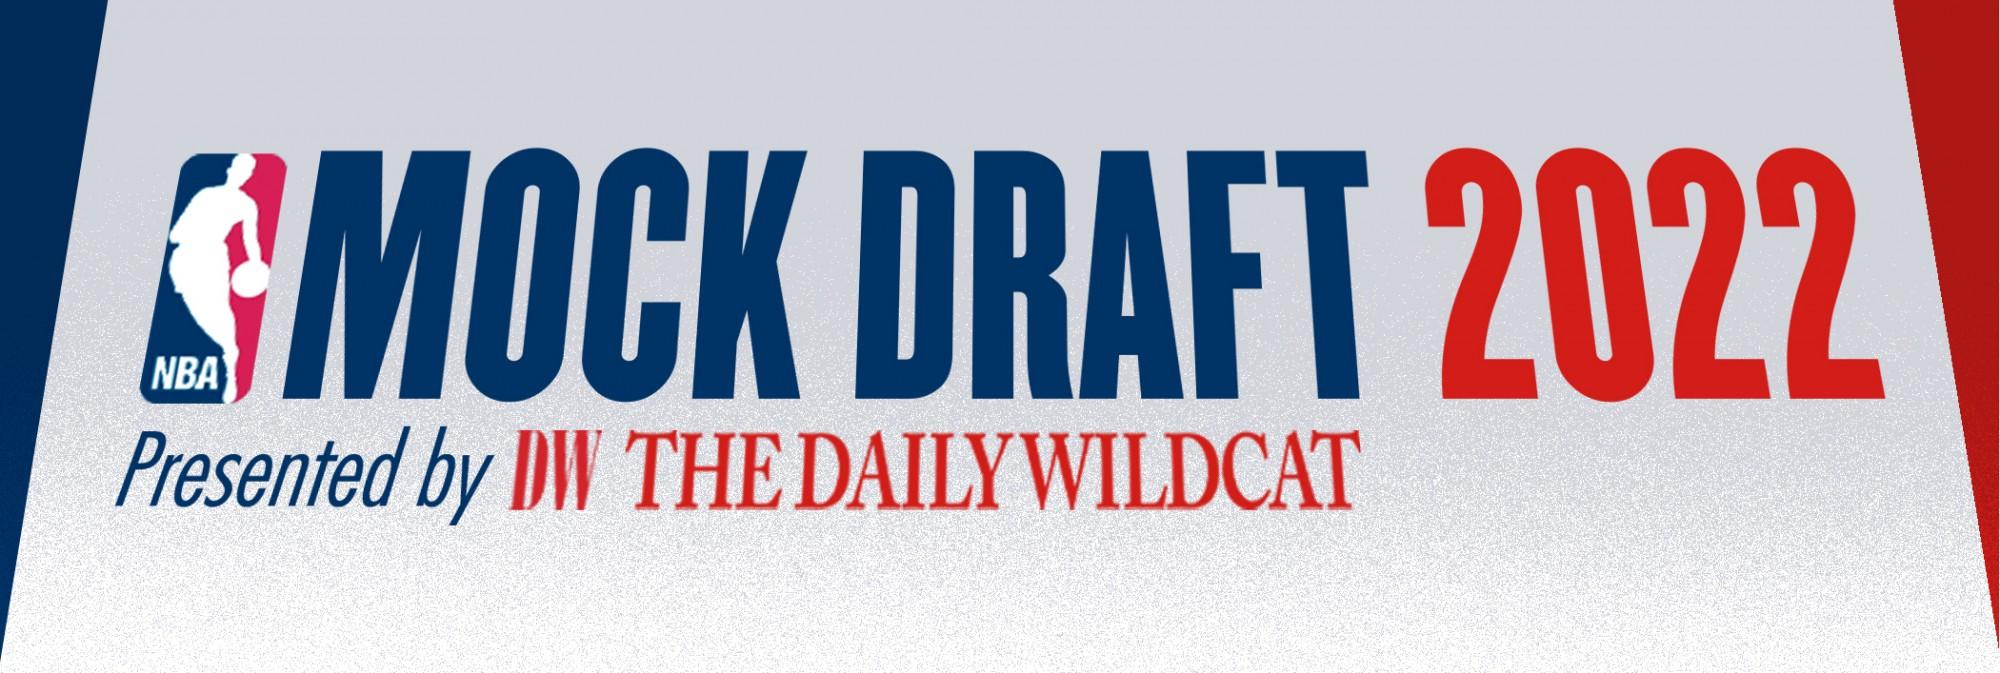 The Daily Wildcat's 2022 NBA mock draft – The Daily Wildcat